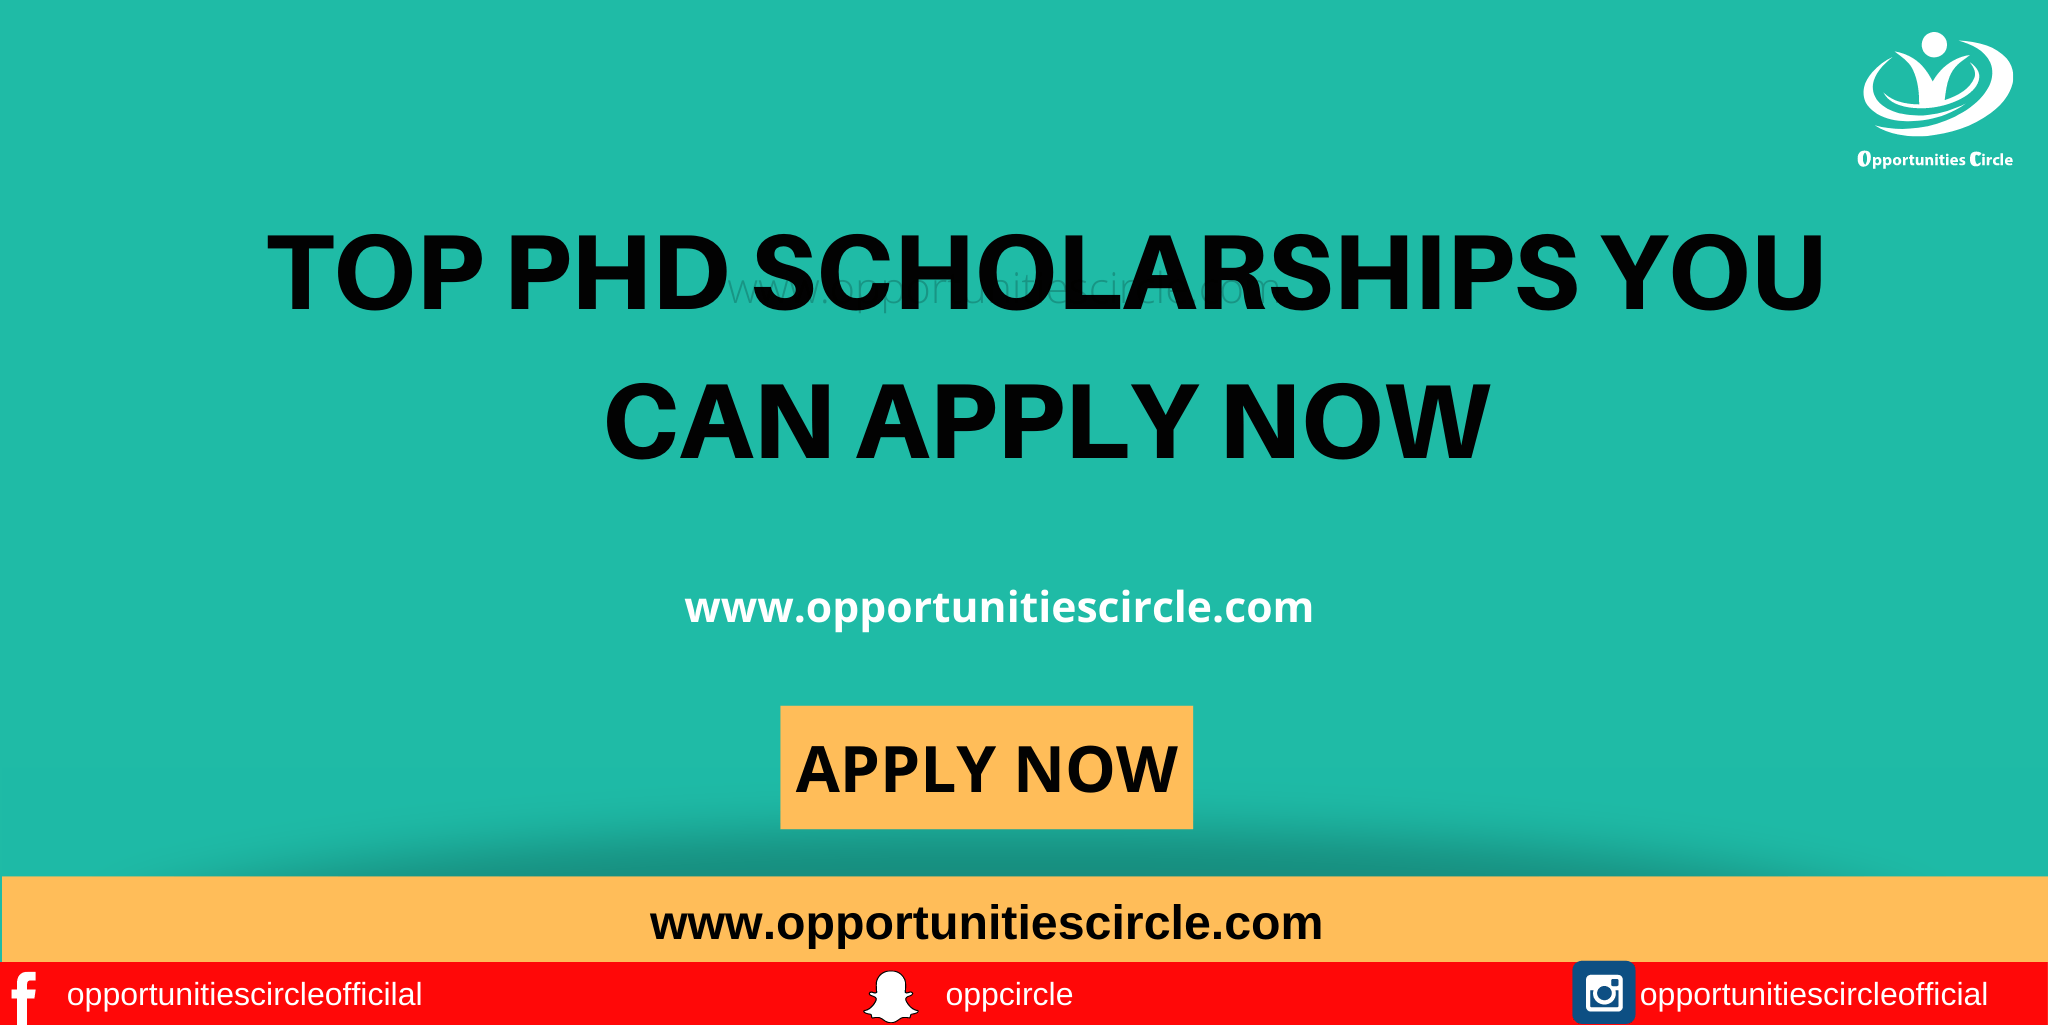 phd scholarships in foreign universities